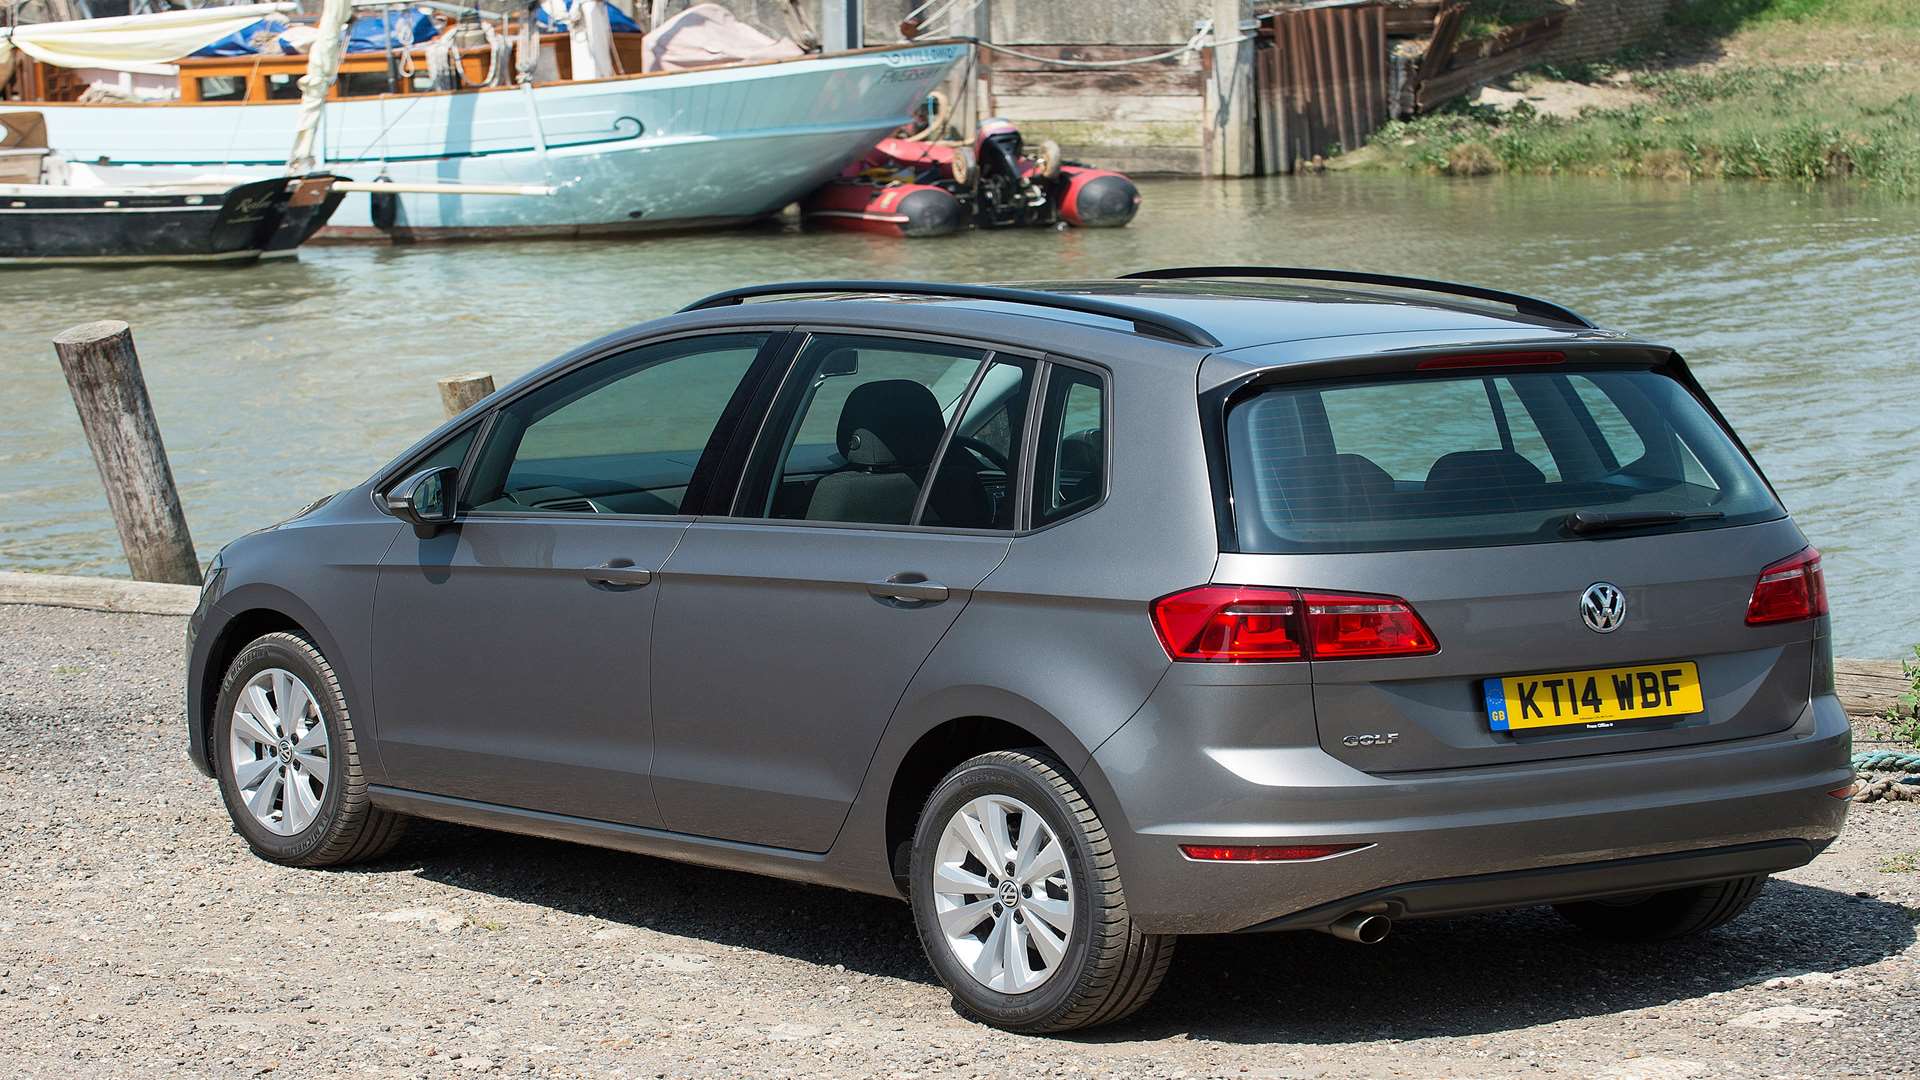 The boot will swallow more luggage than the model it replaces, the Golf plus, but less than the estate version